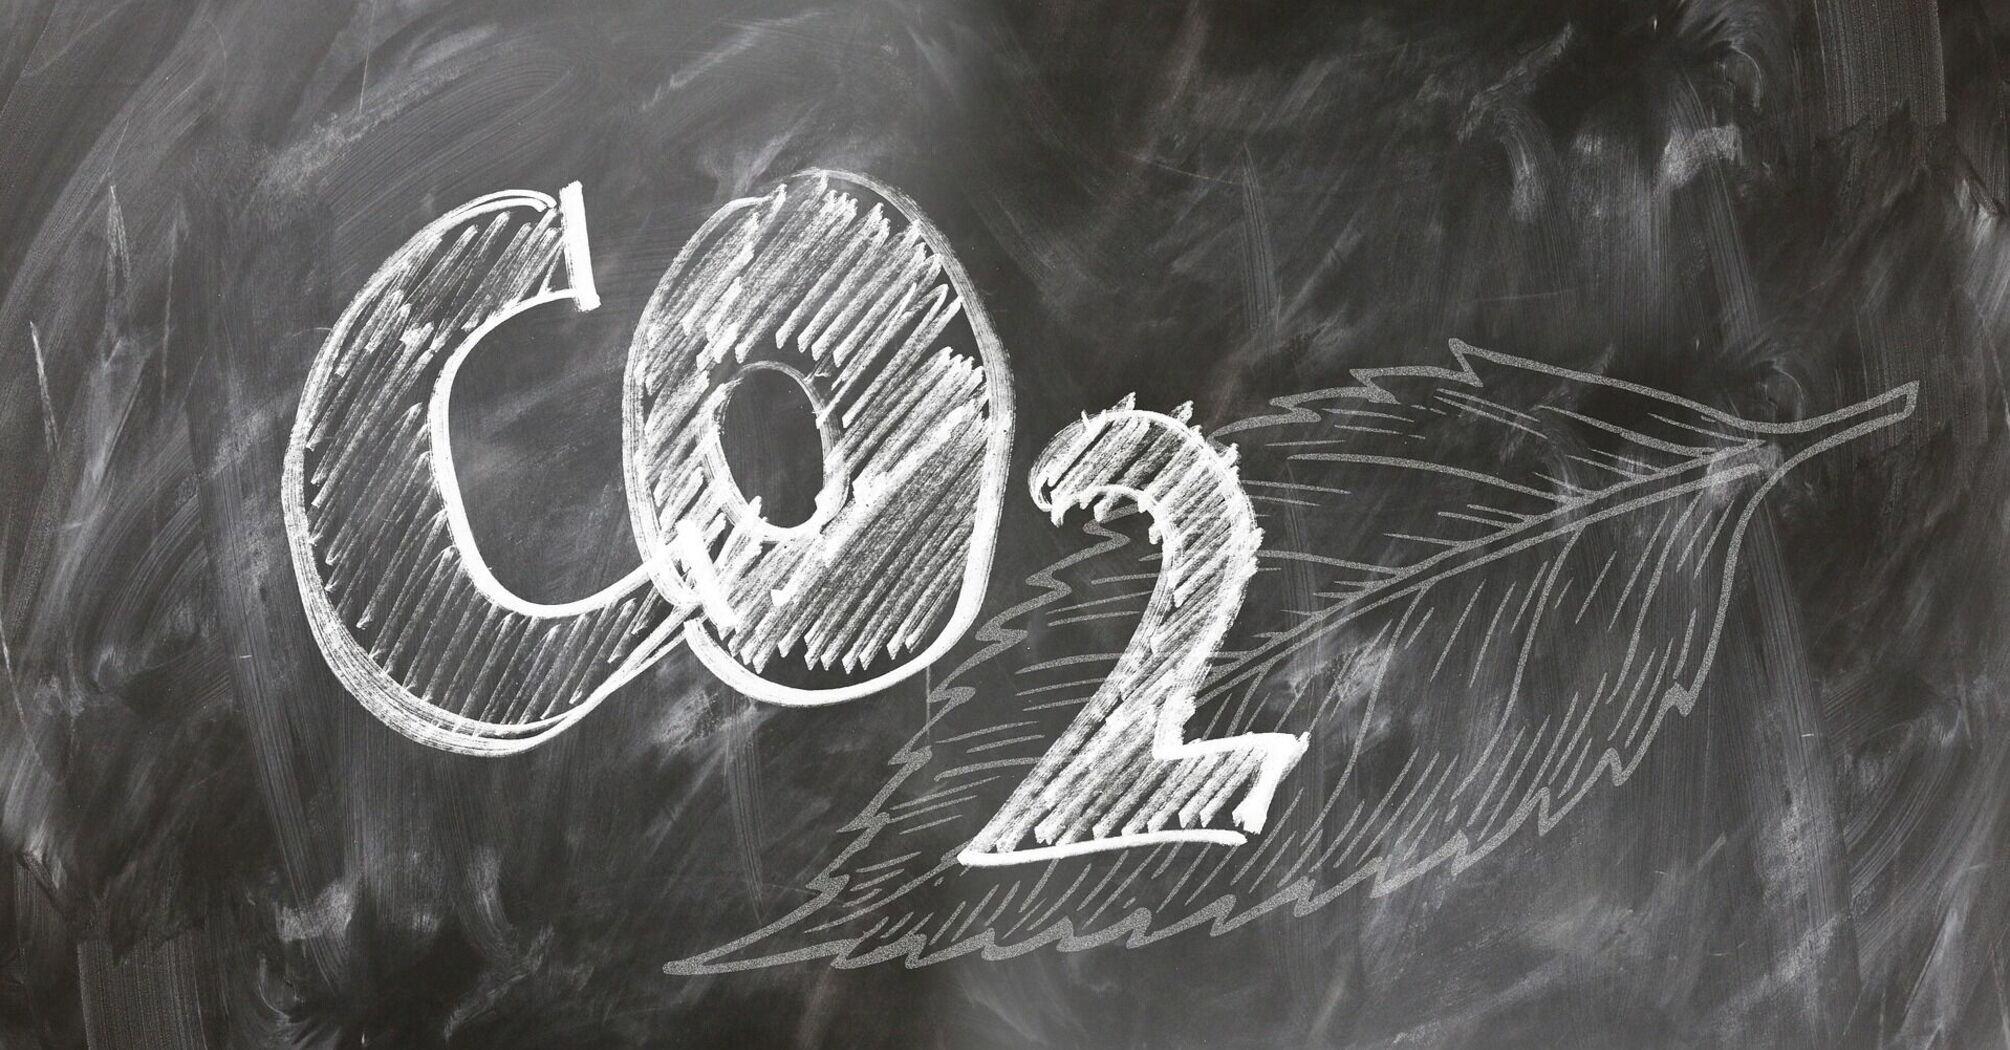 Chalk drawing of the 'CO2' chemical formula with an arrow on a blackboard, symbolizing the reduction or movement of carbon emissions